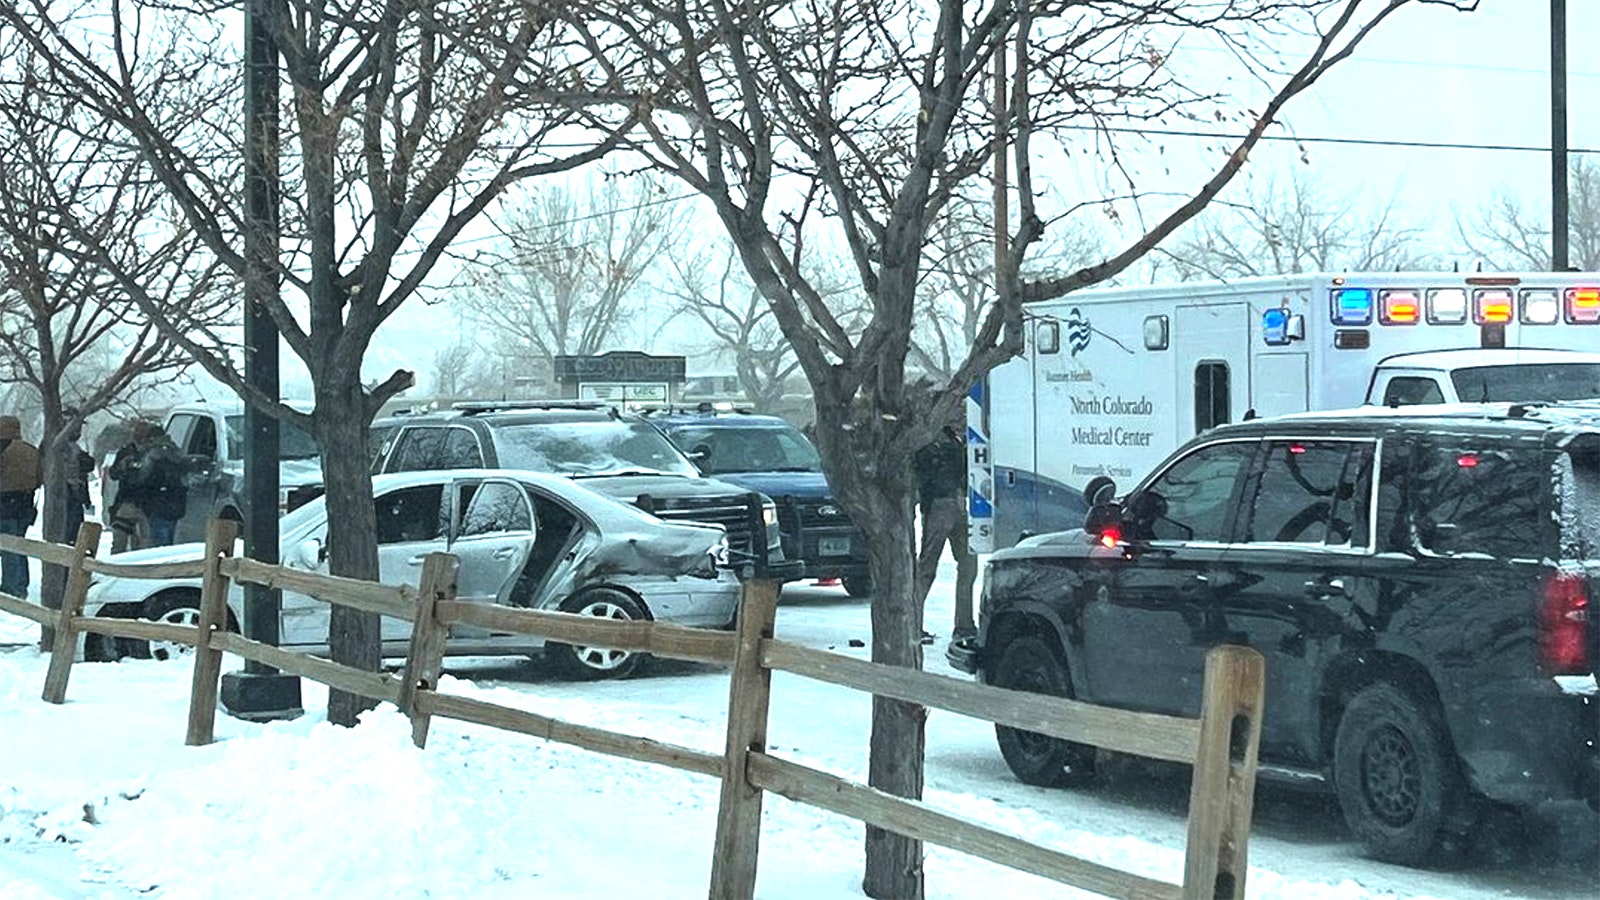 A car chase through Casper on Friday ended with the arrests of a local woman and a man wanted out off Colorado, but not before the car rammed two police vehicles.